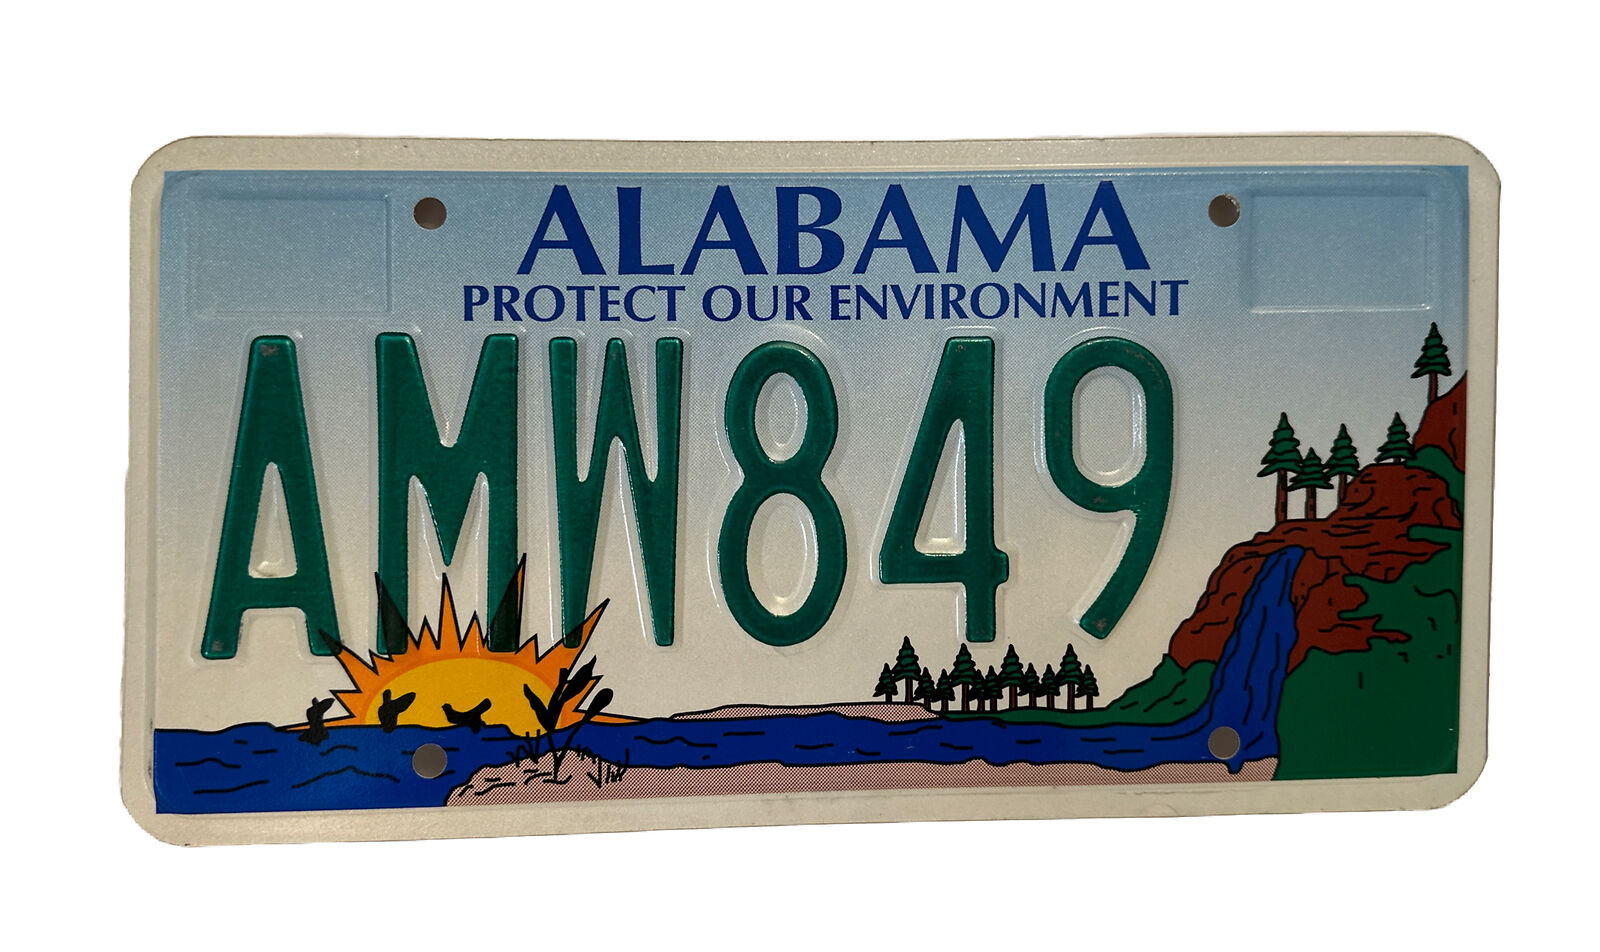 Alabama 2015 PROTECT OUR ENVIRONMENT GRAPHIC License Plate # AMW 849 - NEAR MINT